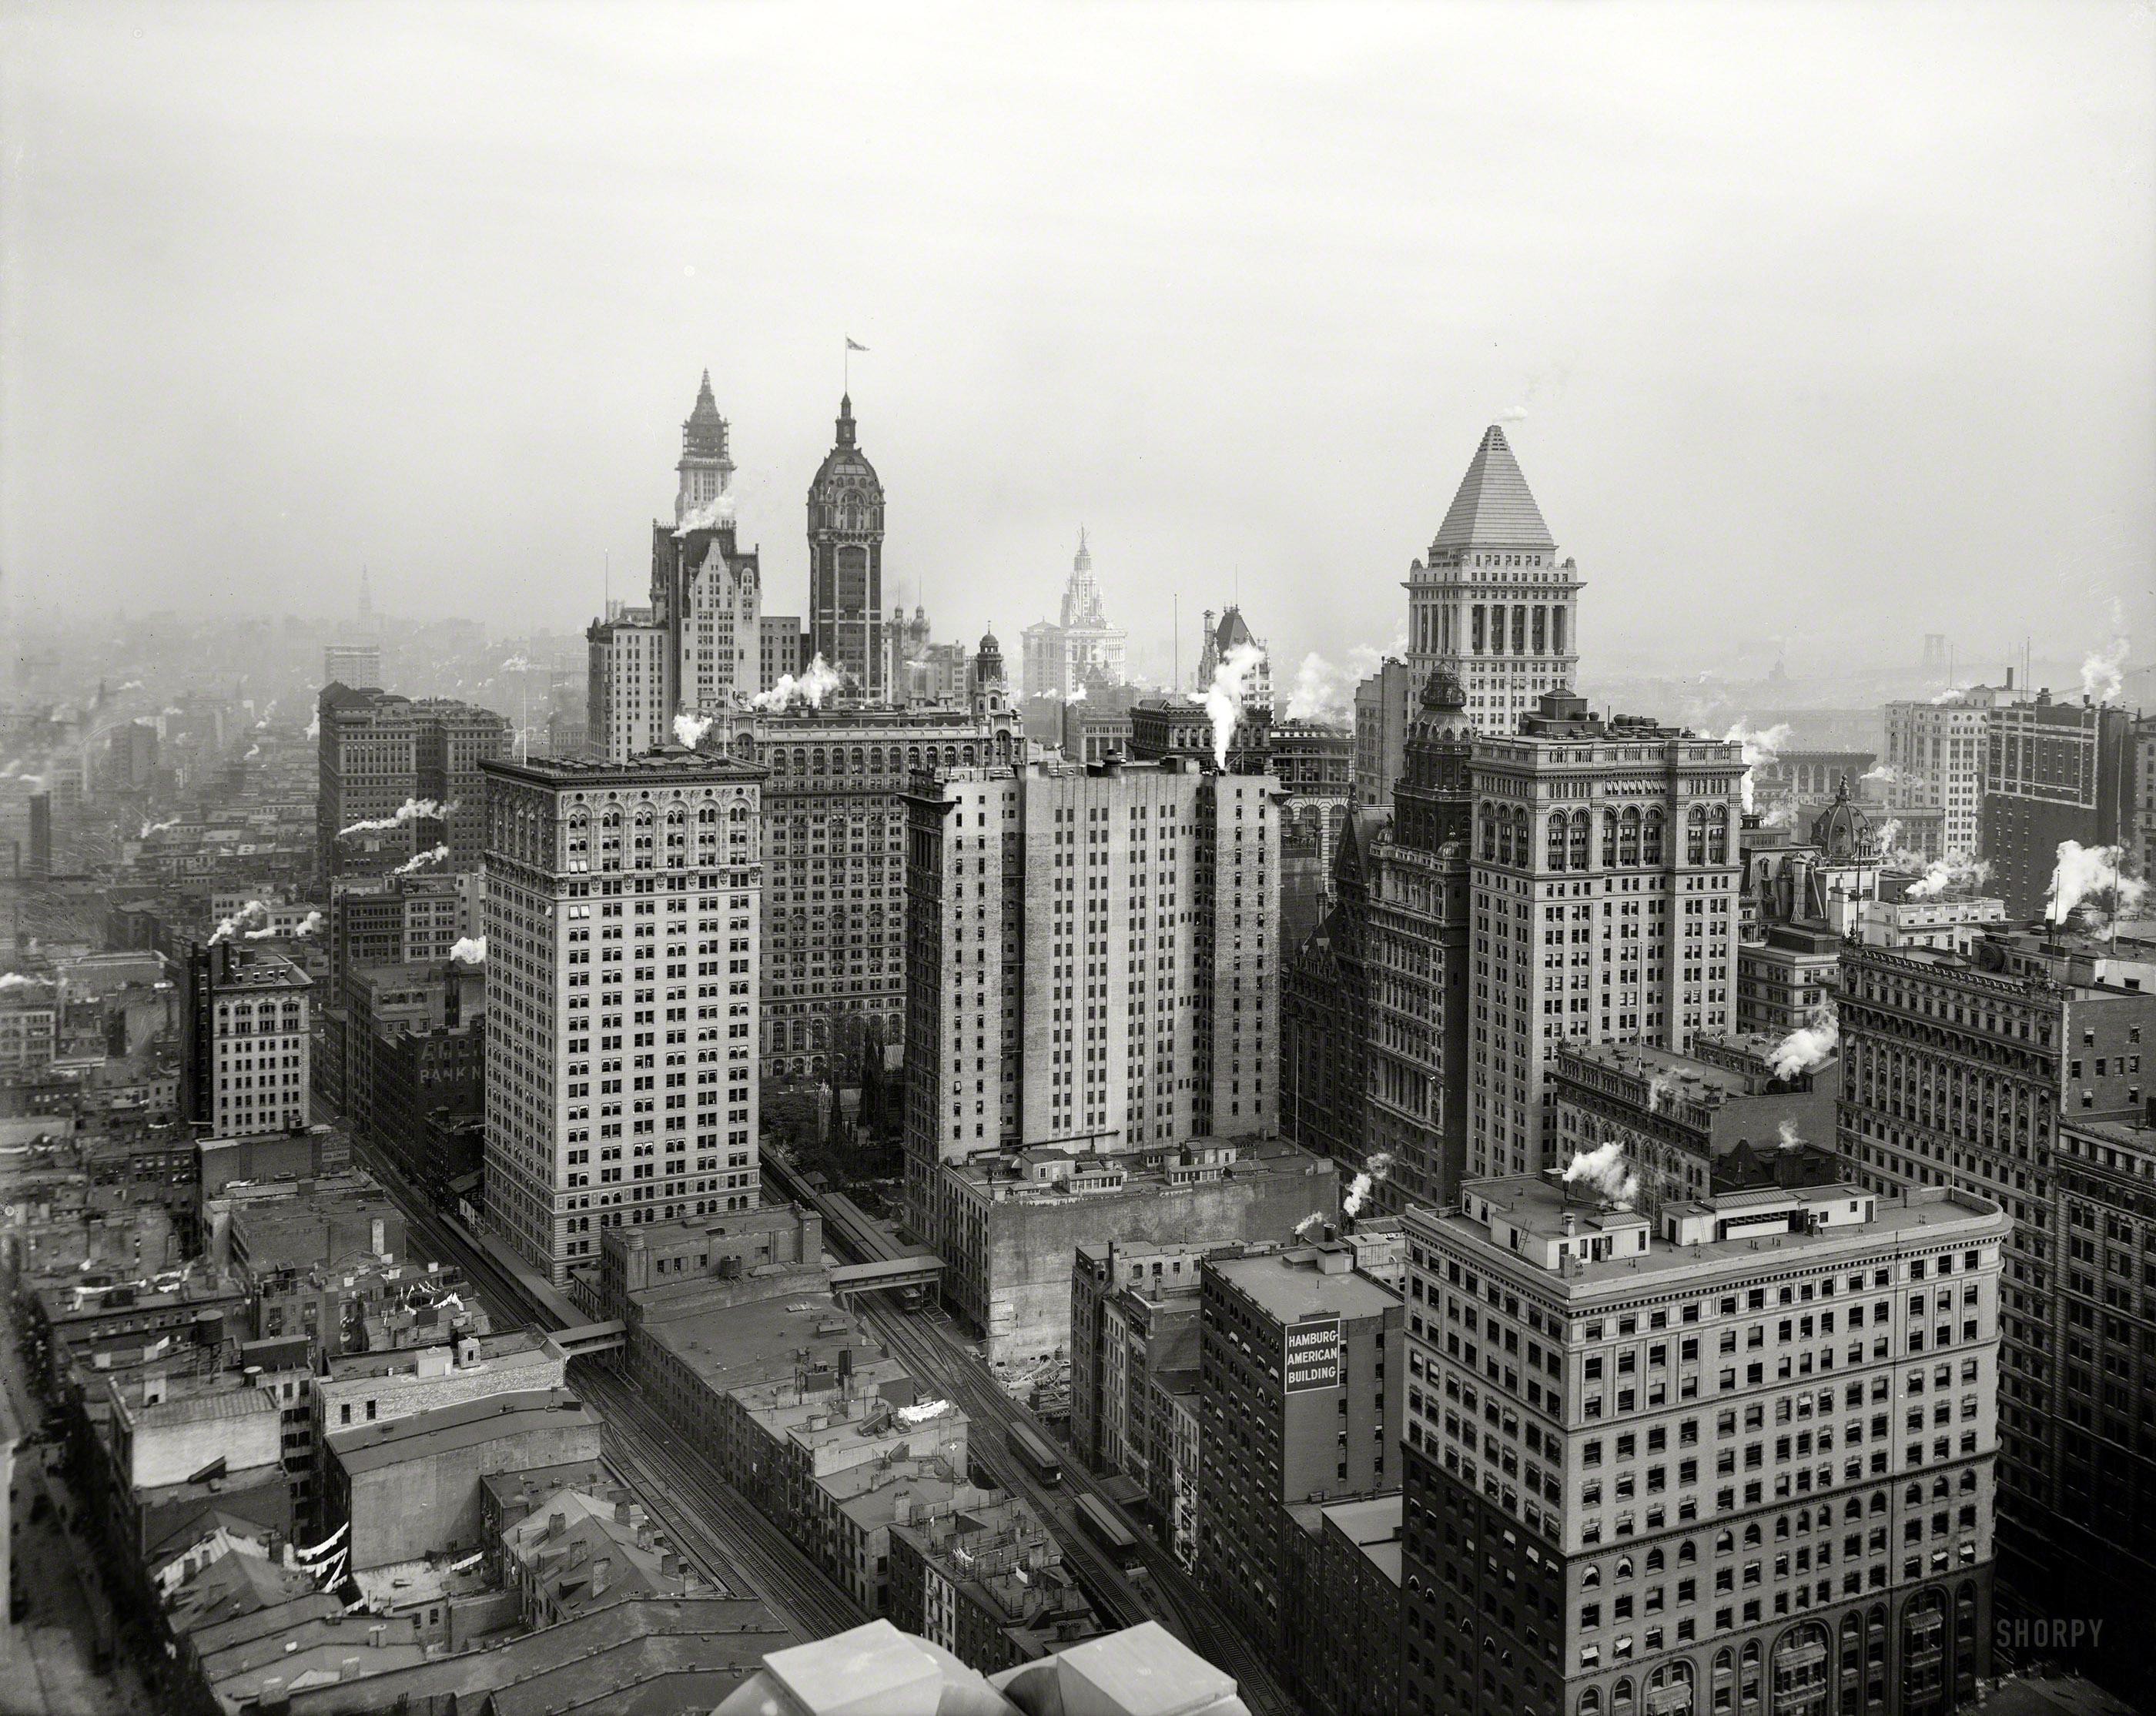 New York circa 1912. "Big buildings of Lower Manhattan." Notable skyscrapers (in a scene last glimpsed here) include the Woolworth tower (under construction), the Singer Building and the Bankers Trust pyramid. View full size.